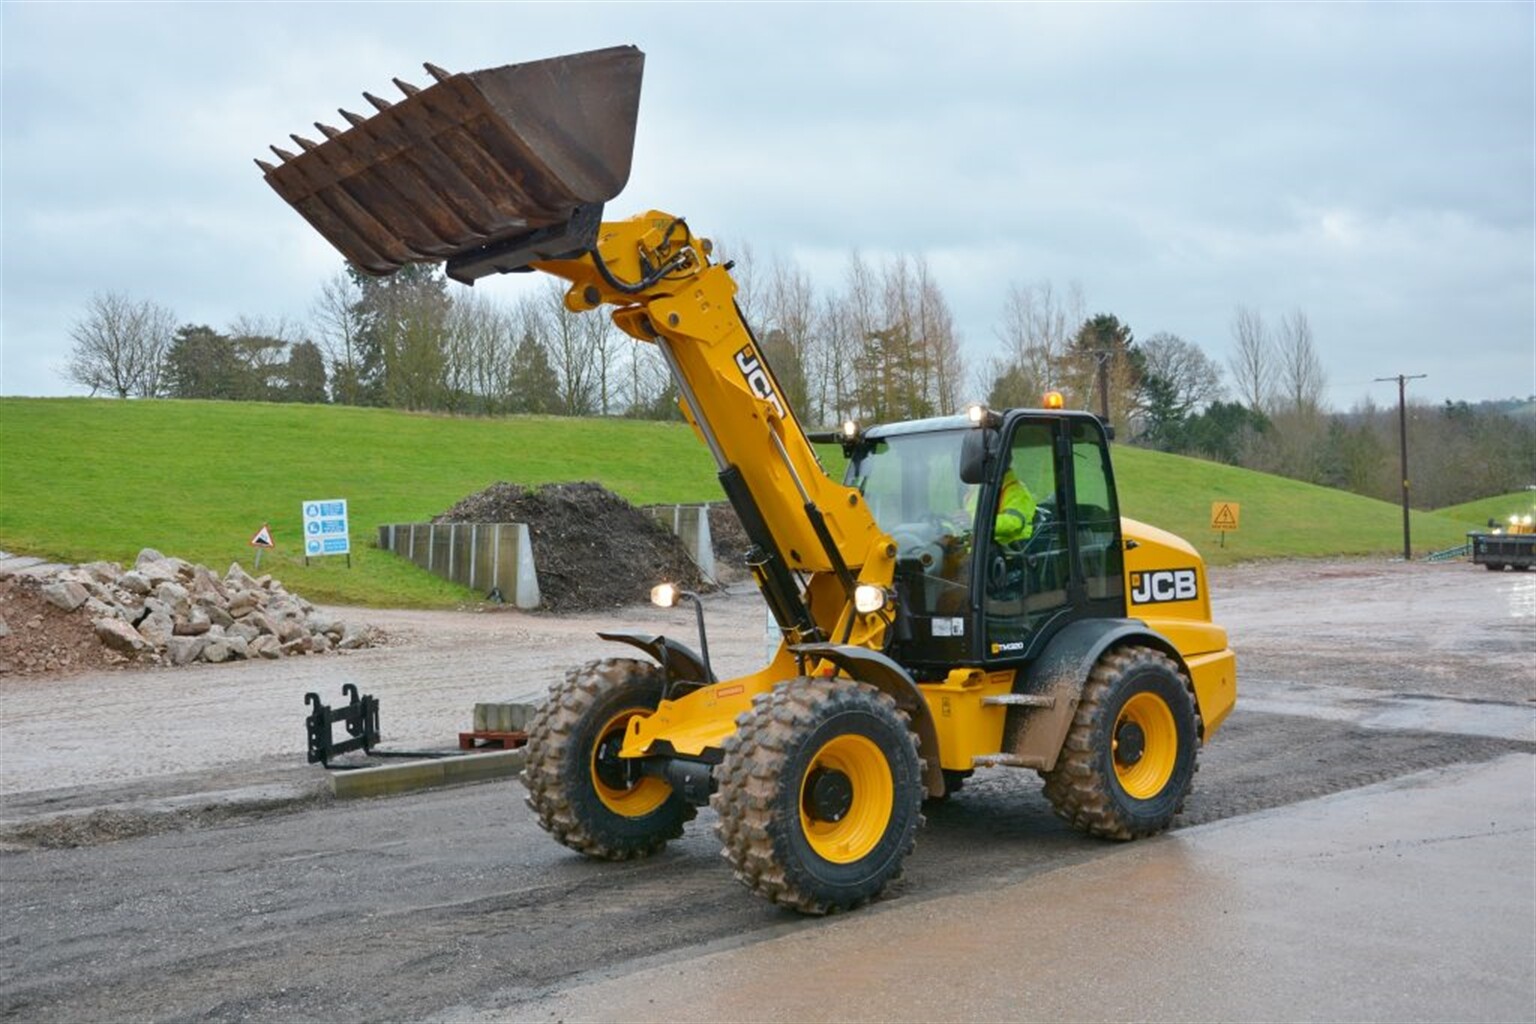 JCB reaches for the sky with a raft of new products (Part Two)